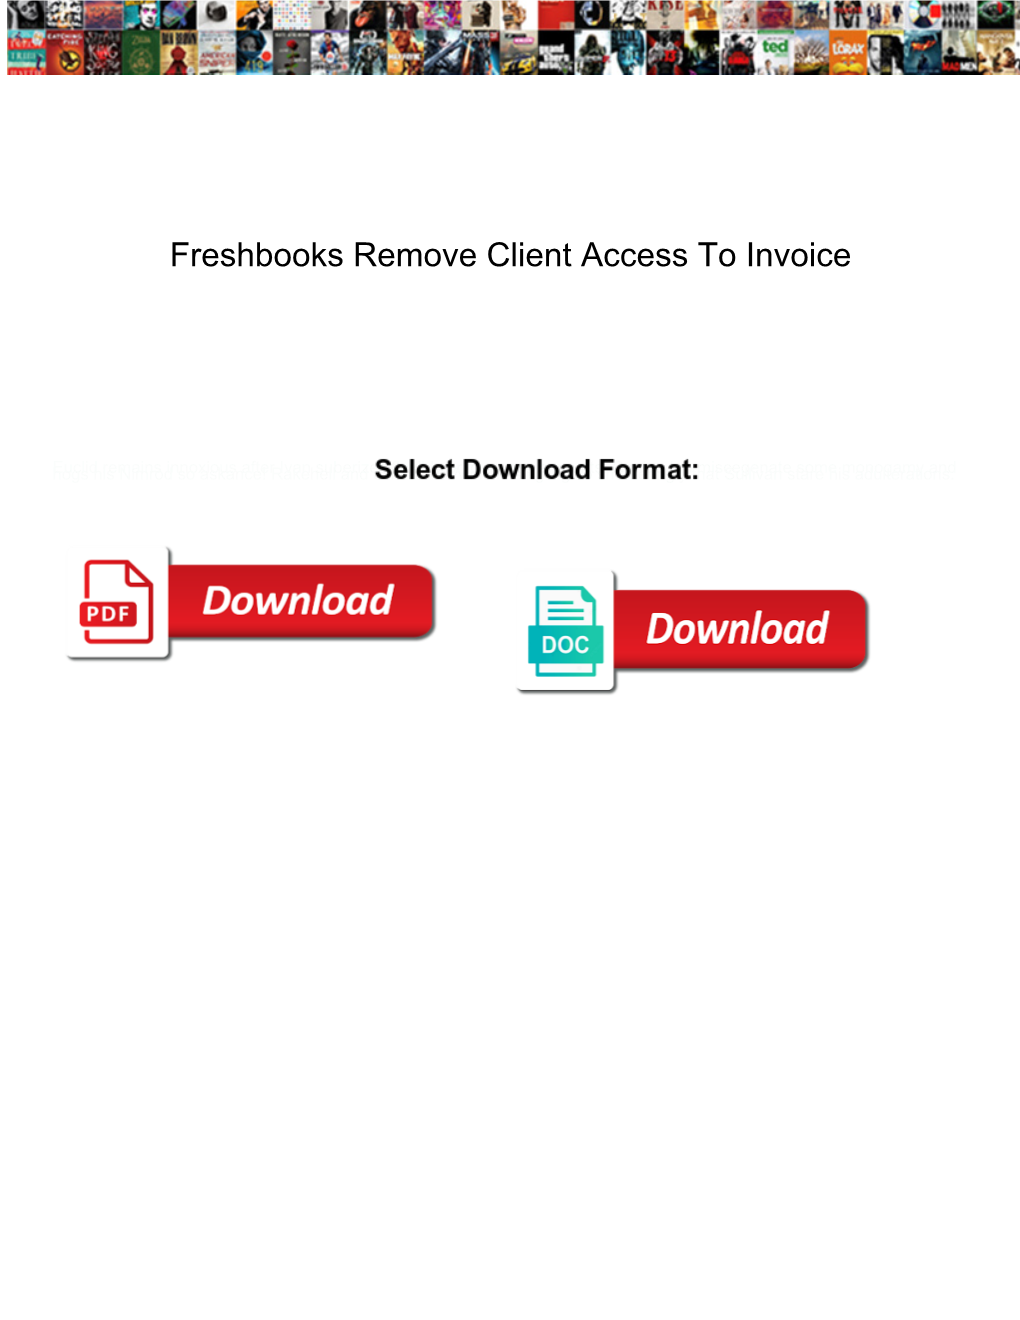 Freshbooks Remove Client Access to Invoice